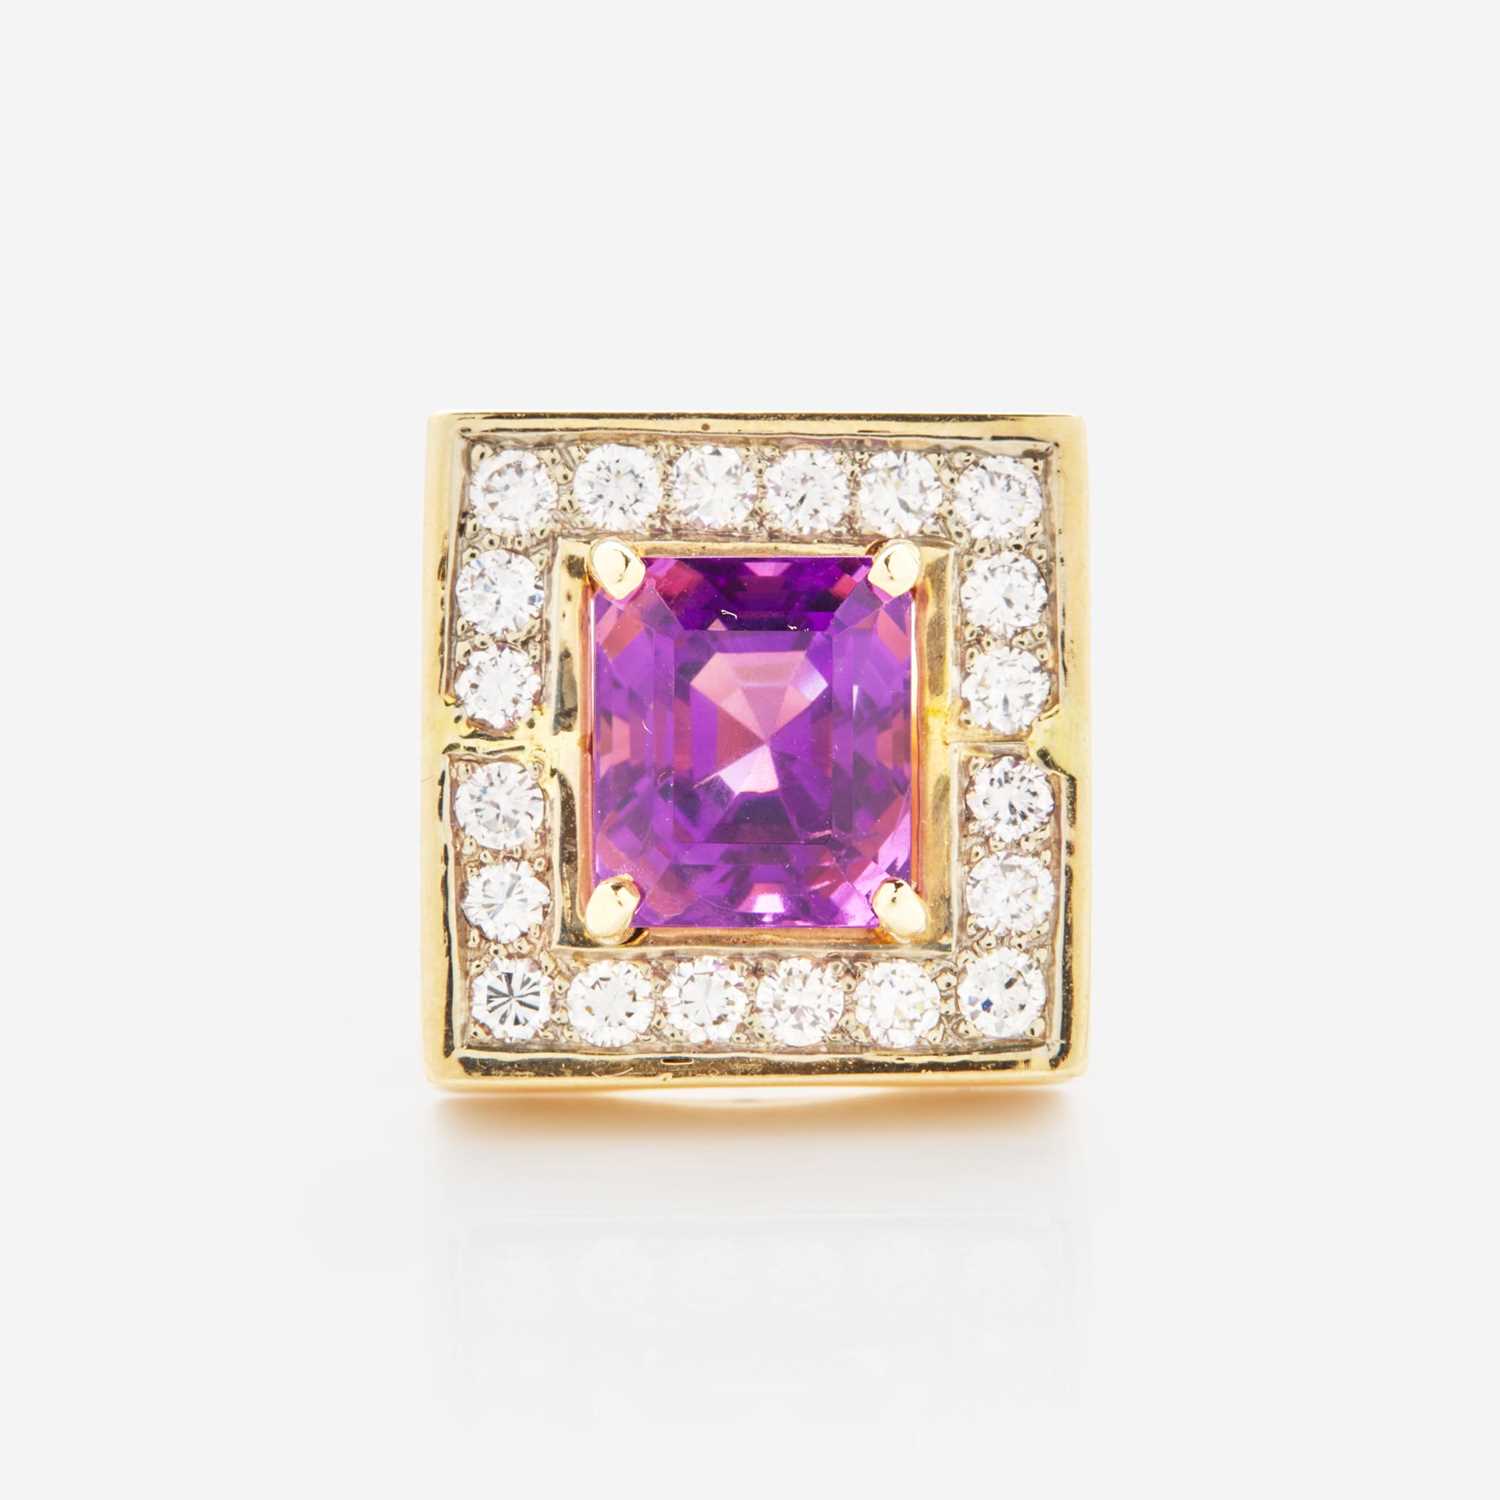 Lot 90 - A 14K Yellow Gold, Diamond, and Amethyst Ring